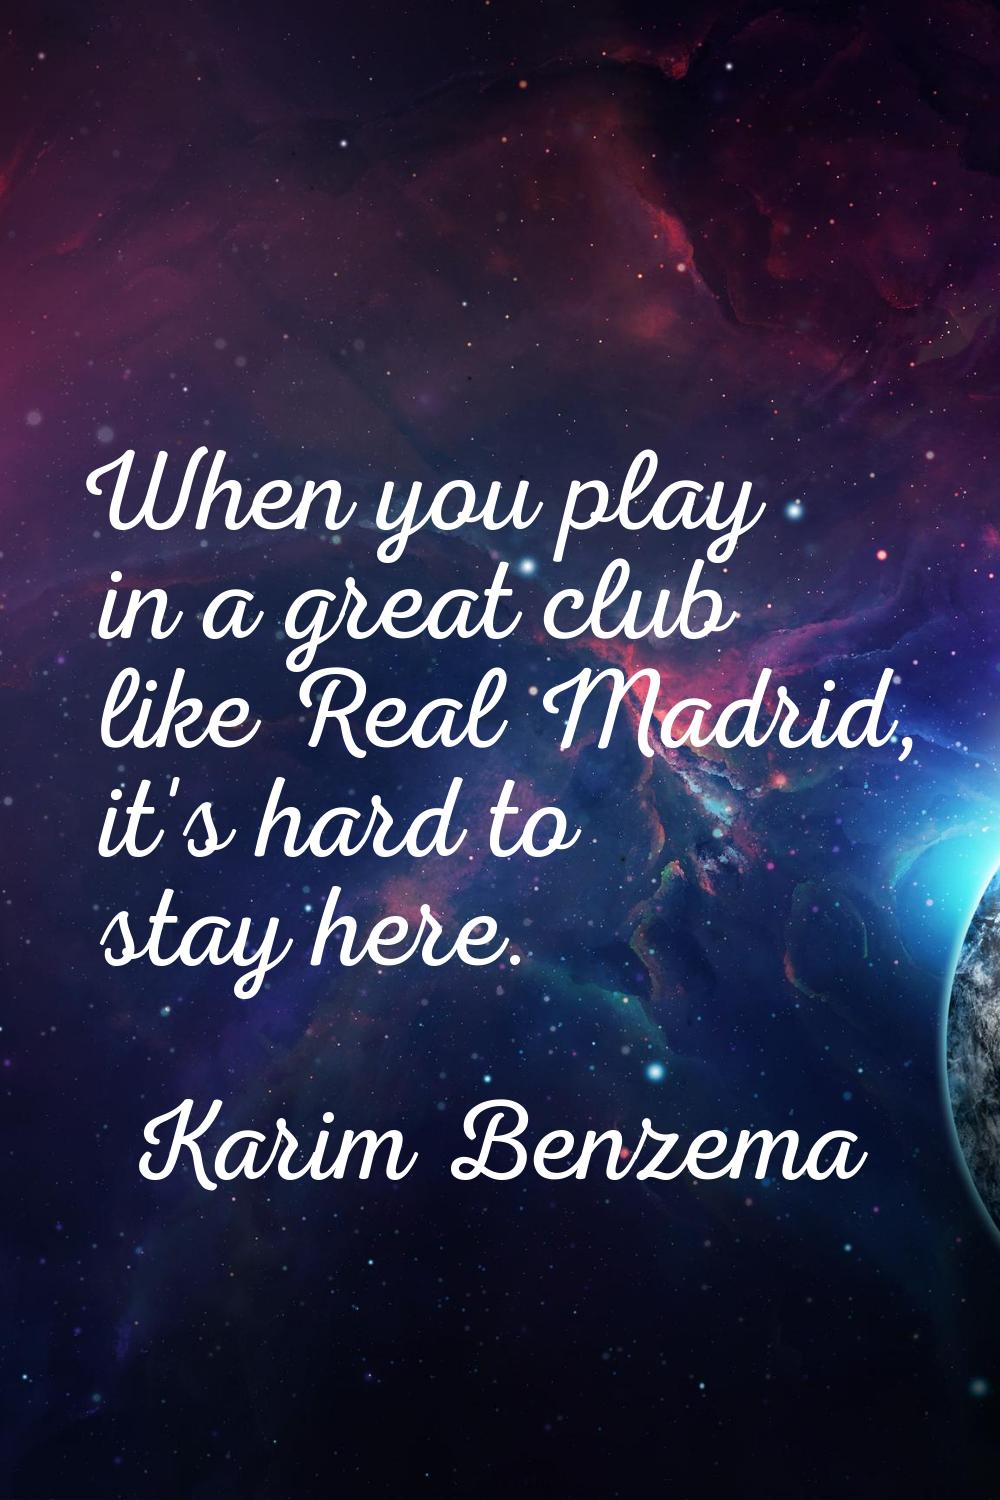 When you play in a great club like Real Madrid, it's hard to stay here.